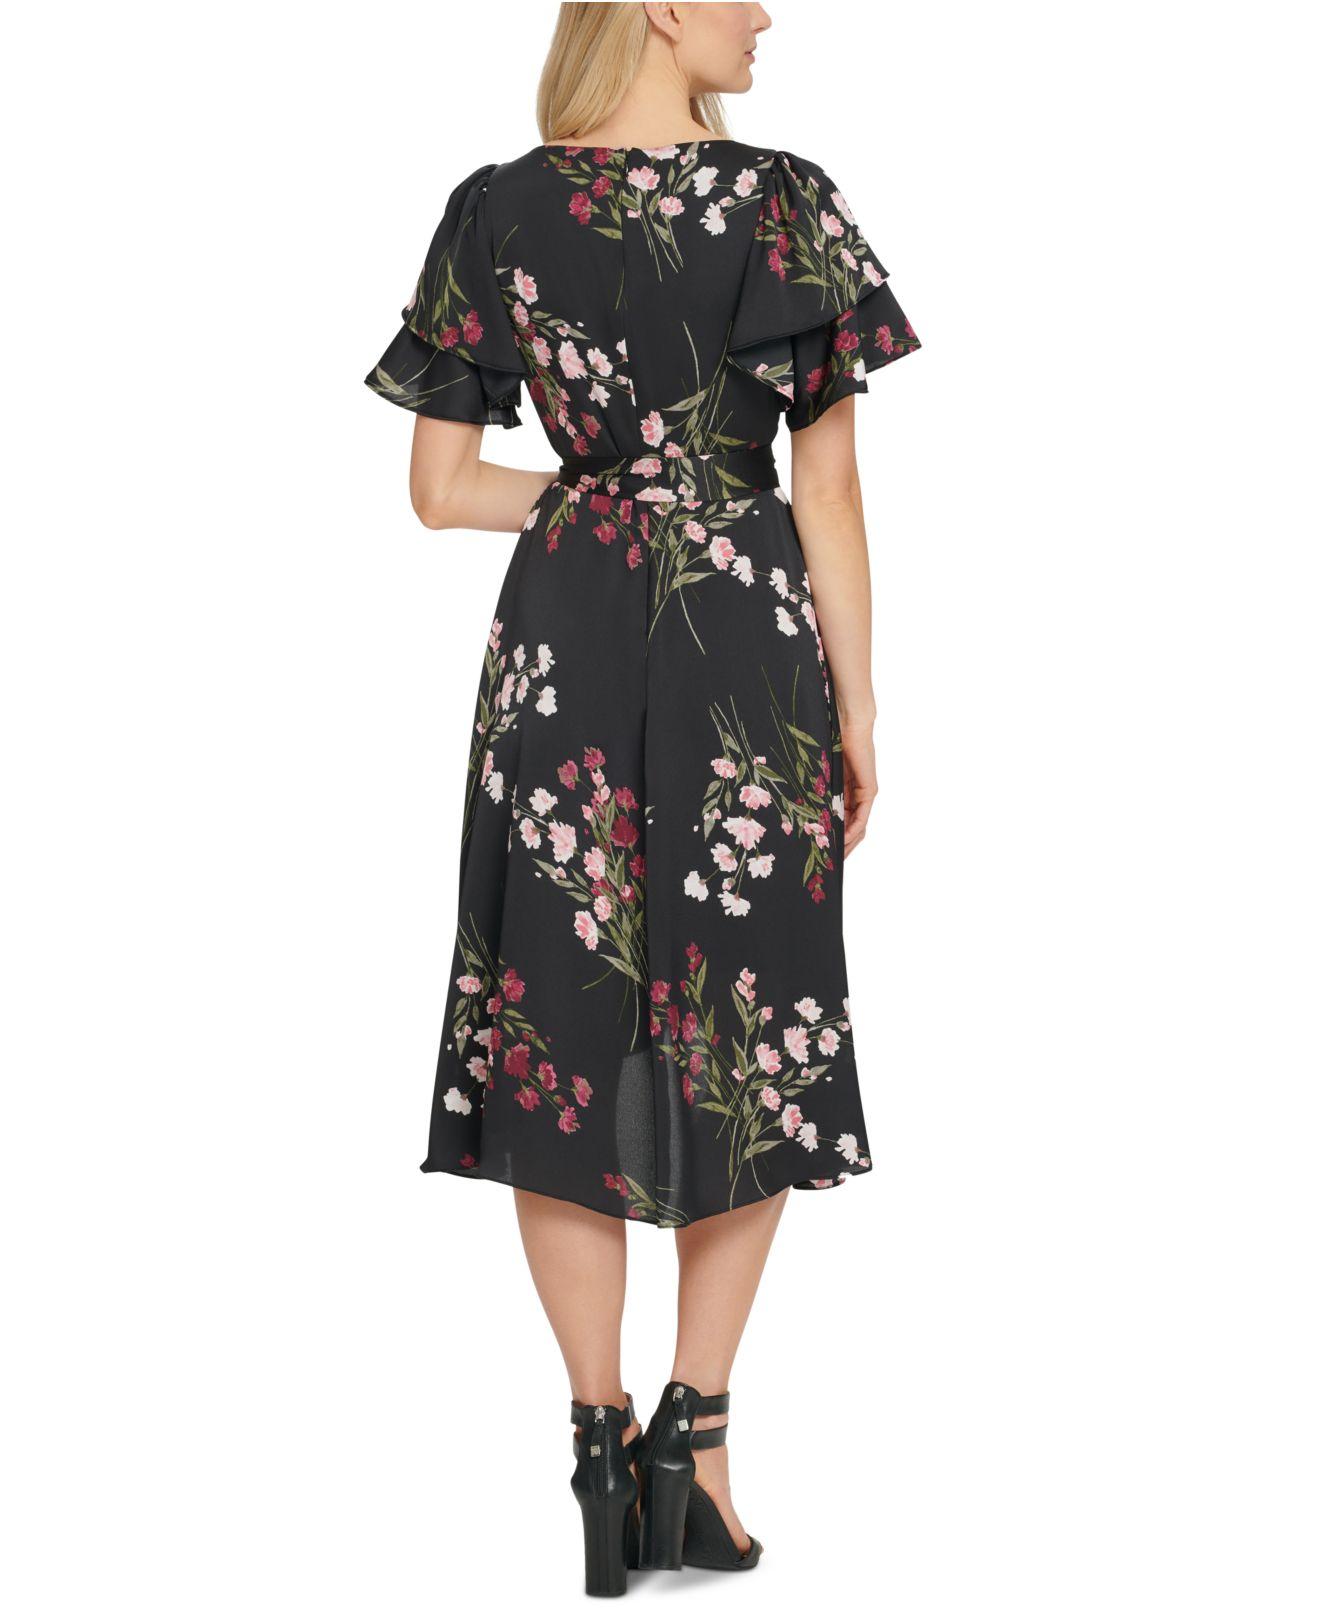 DKNY Synthetic Floral-print Faux-wrap Dress in Black Combo (Black) - Lyst